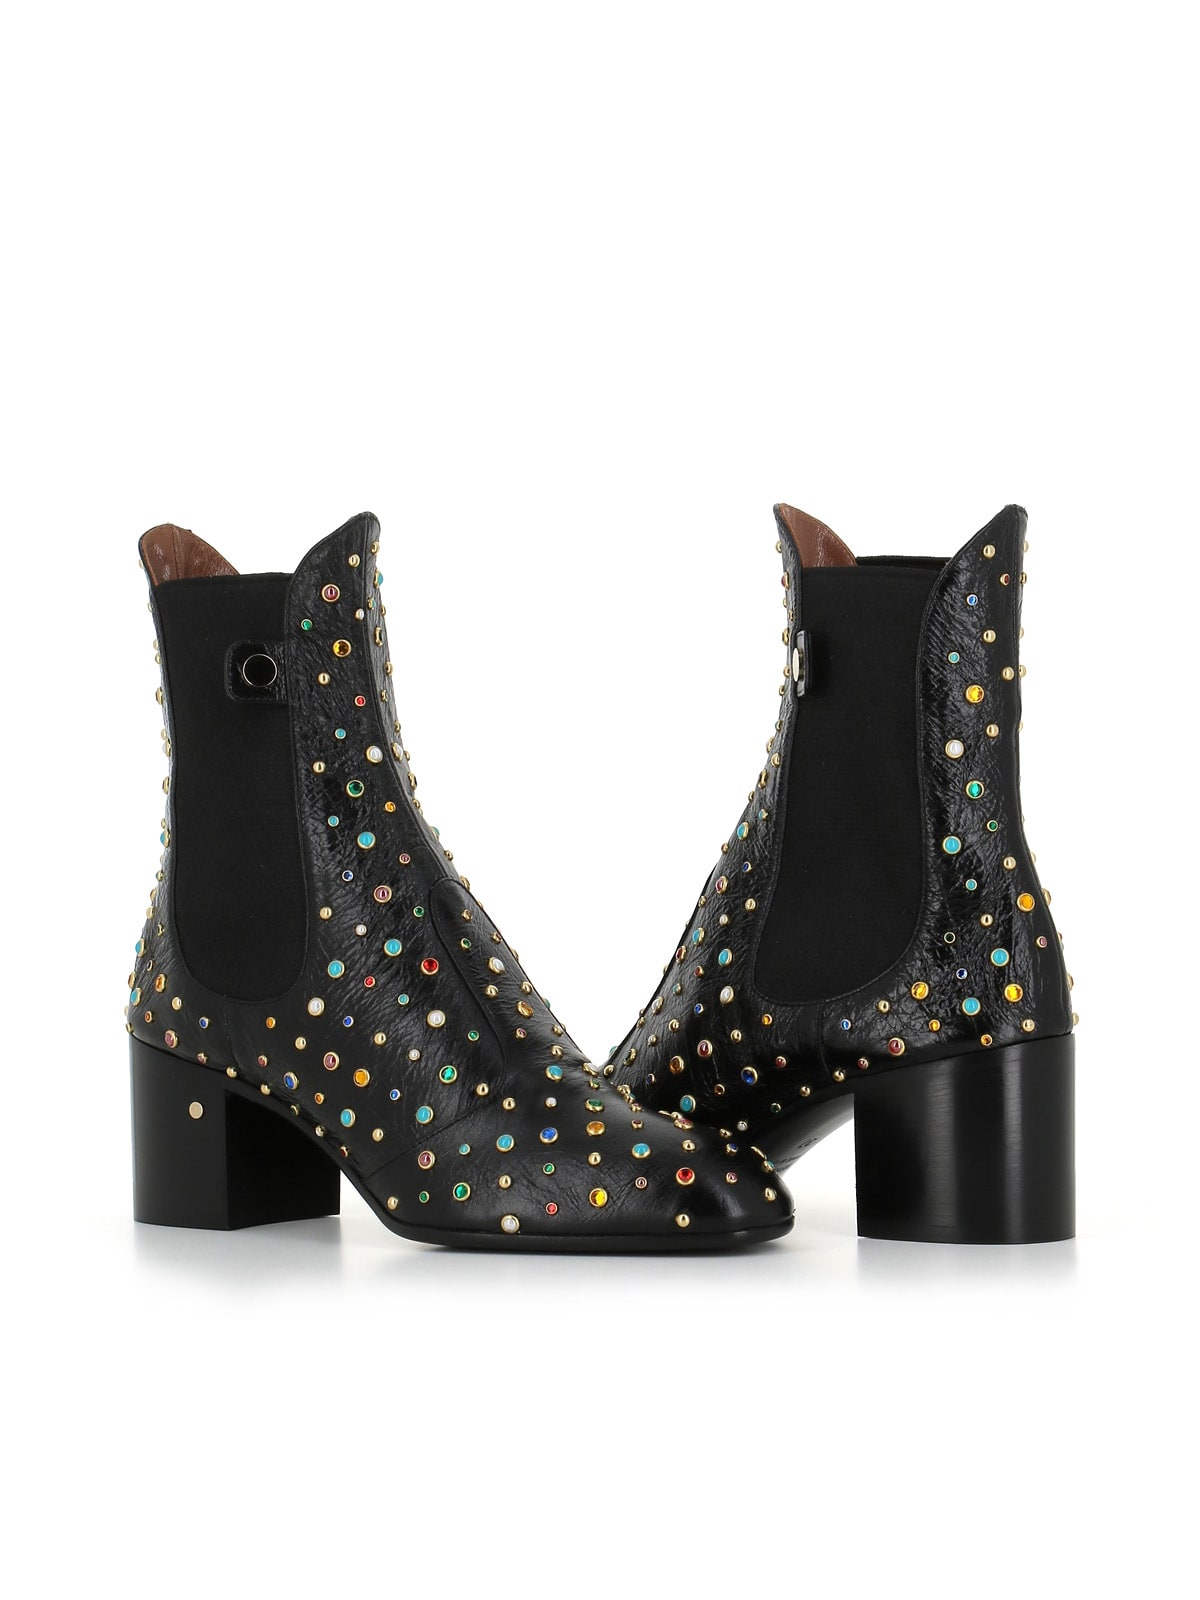 Boot Angie Multicolor Studs